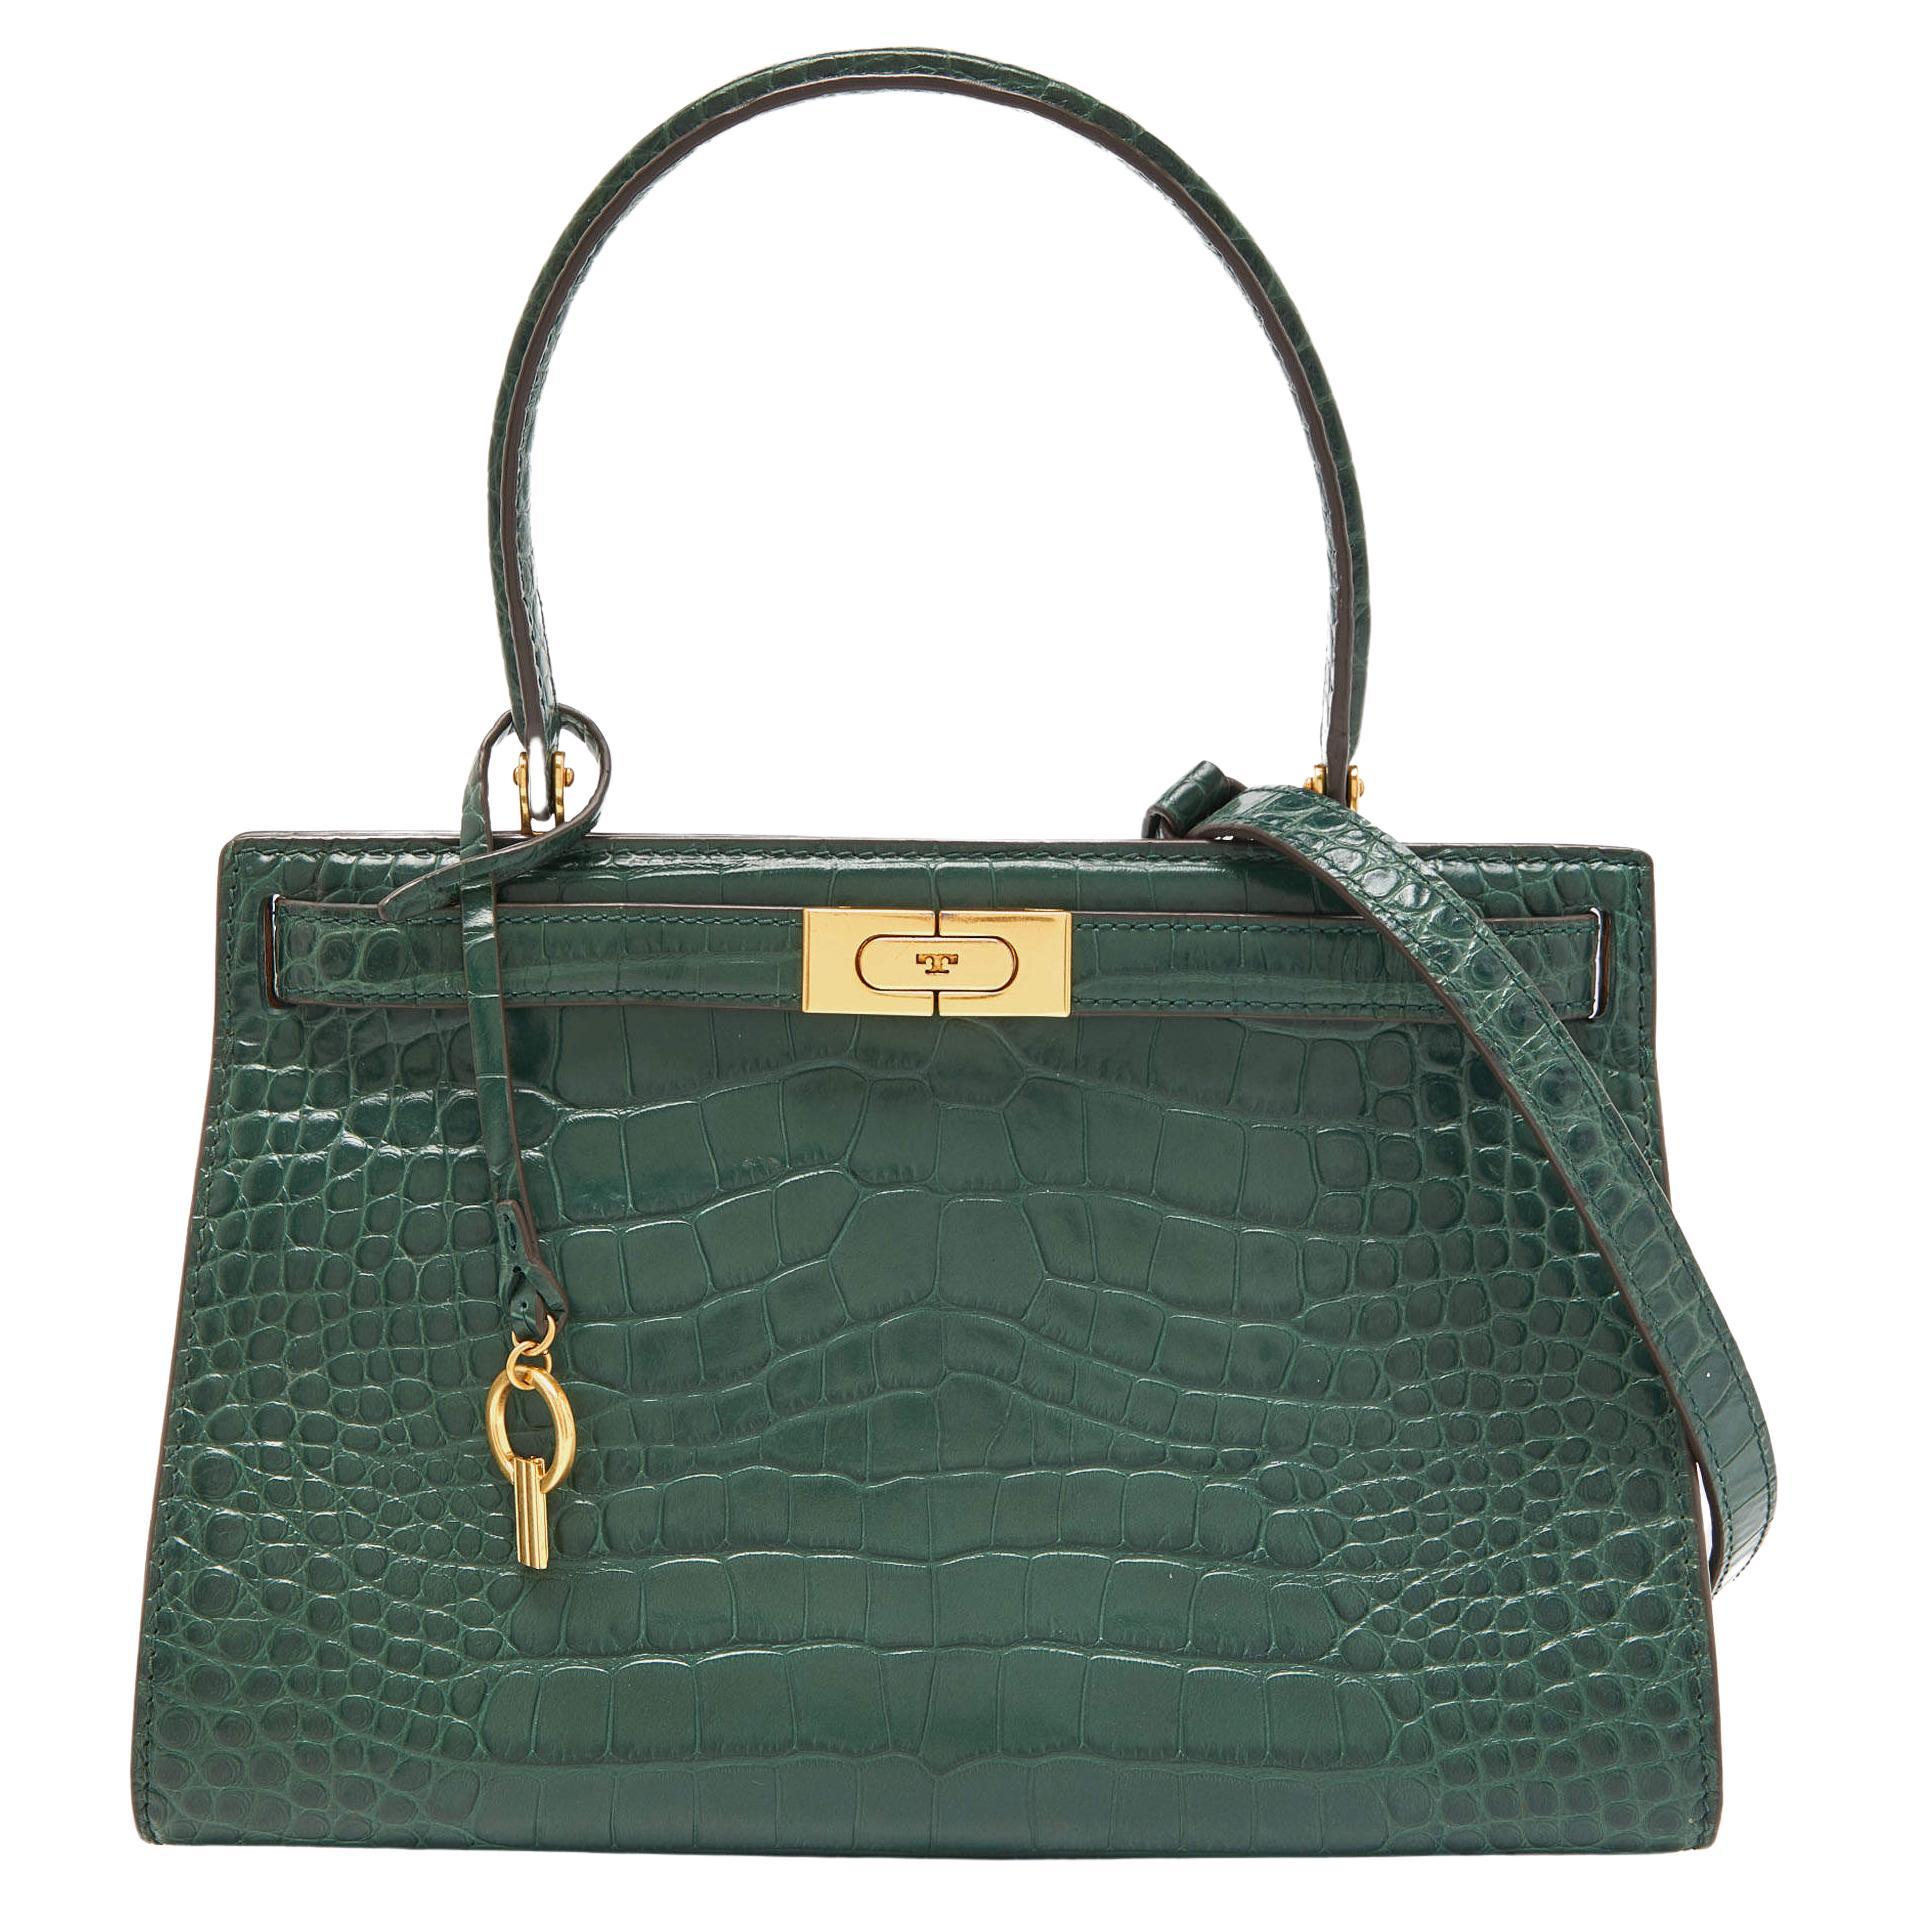 Tory Burch Green Croc Embossed Leather Lee Radziwill Top Handle Bag